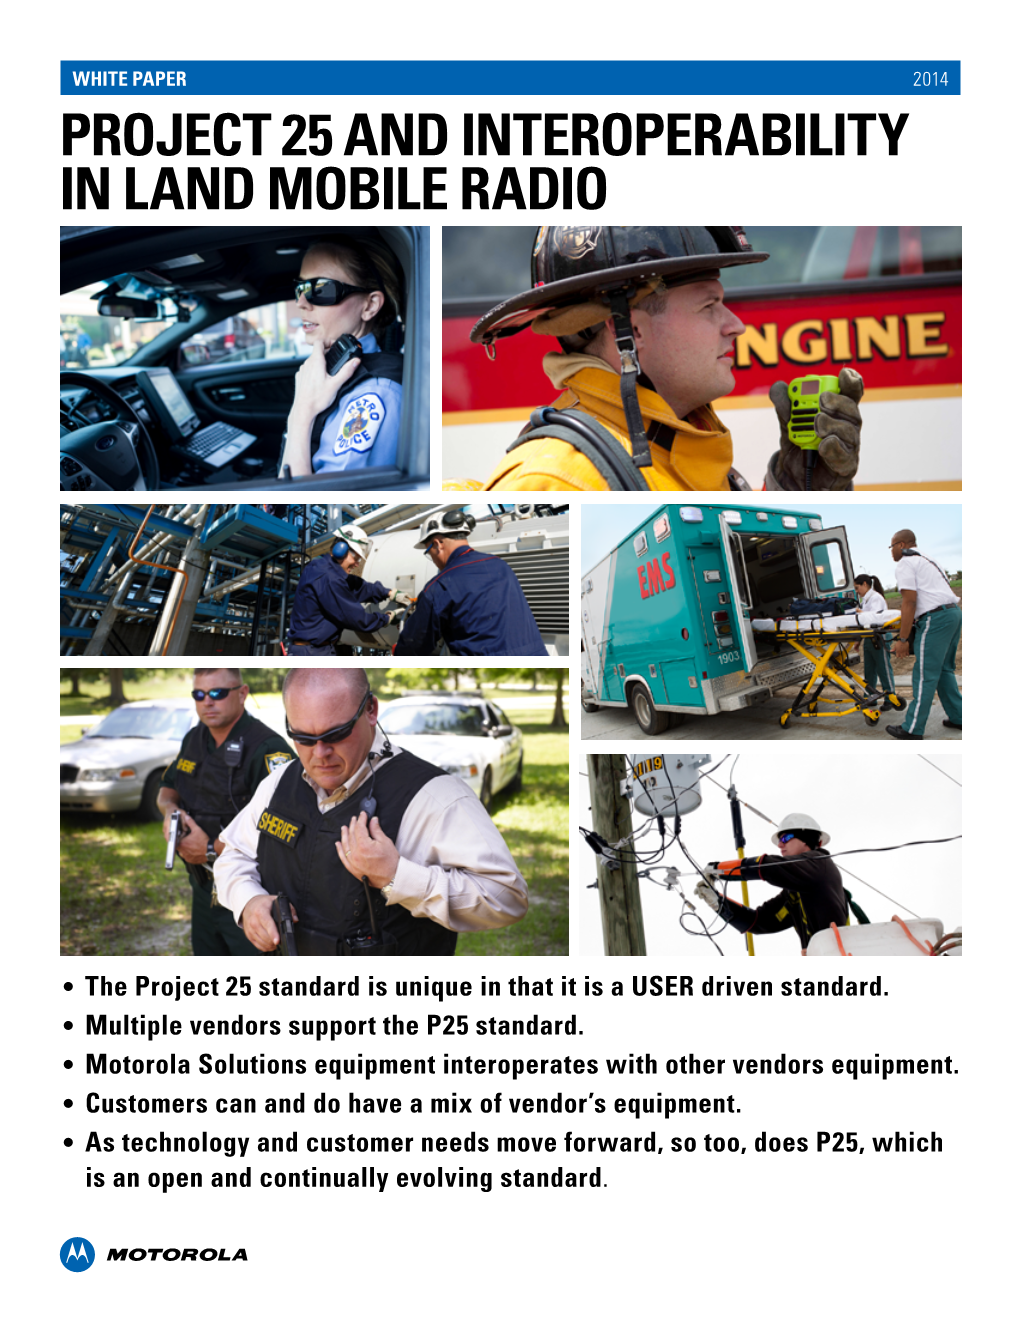 Project 25 and Interoperability in Land Mobile Radio